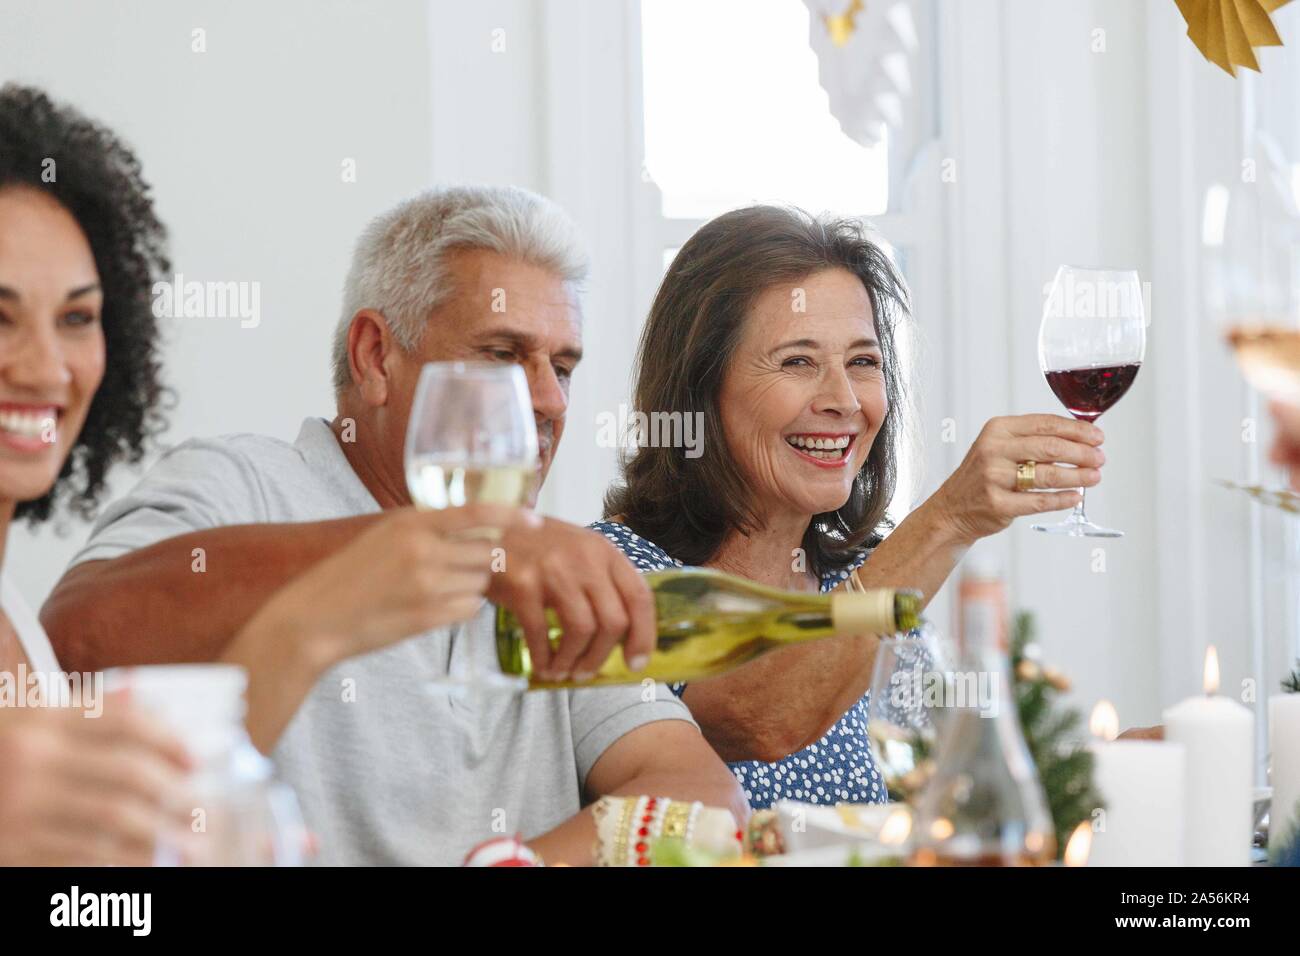 Family toasting wine at home party Stock Photo